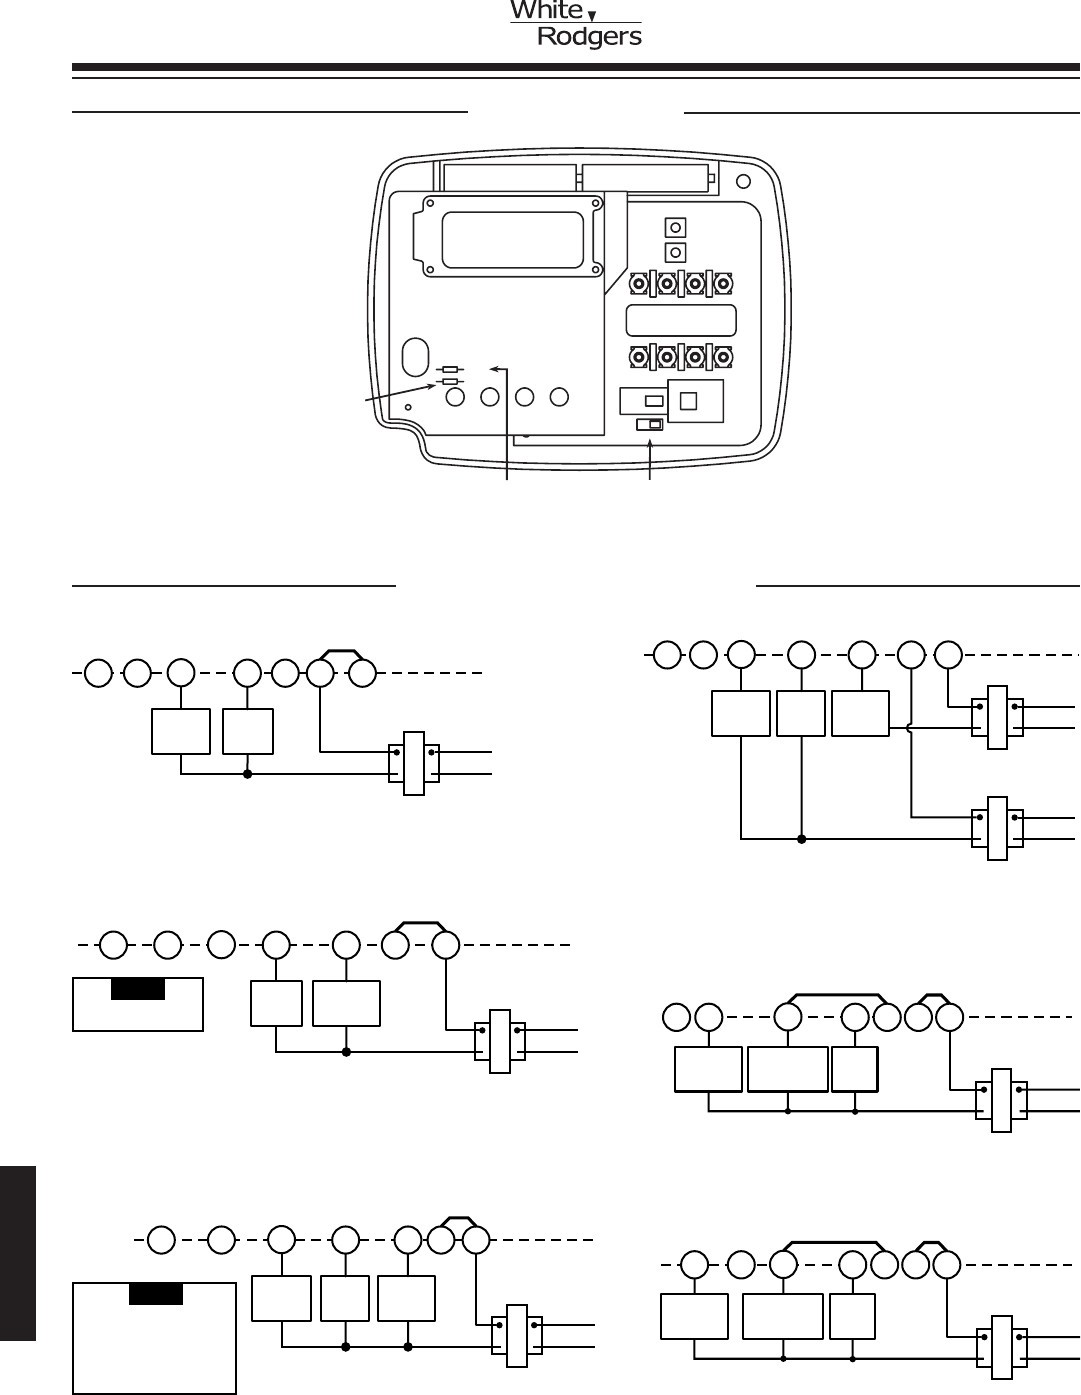 Excellent White Rodgers Thermostat Wiring Diagram Manuals